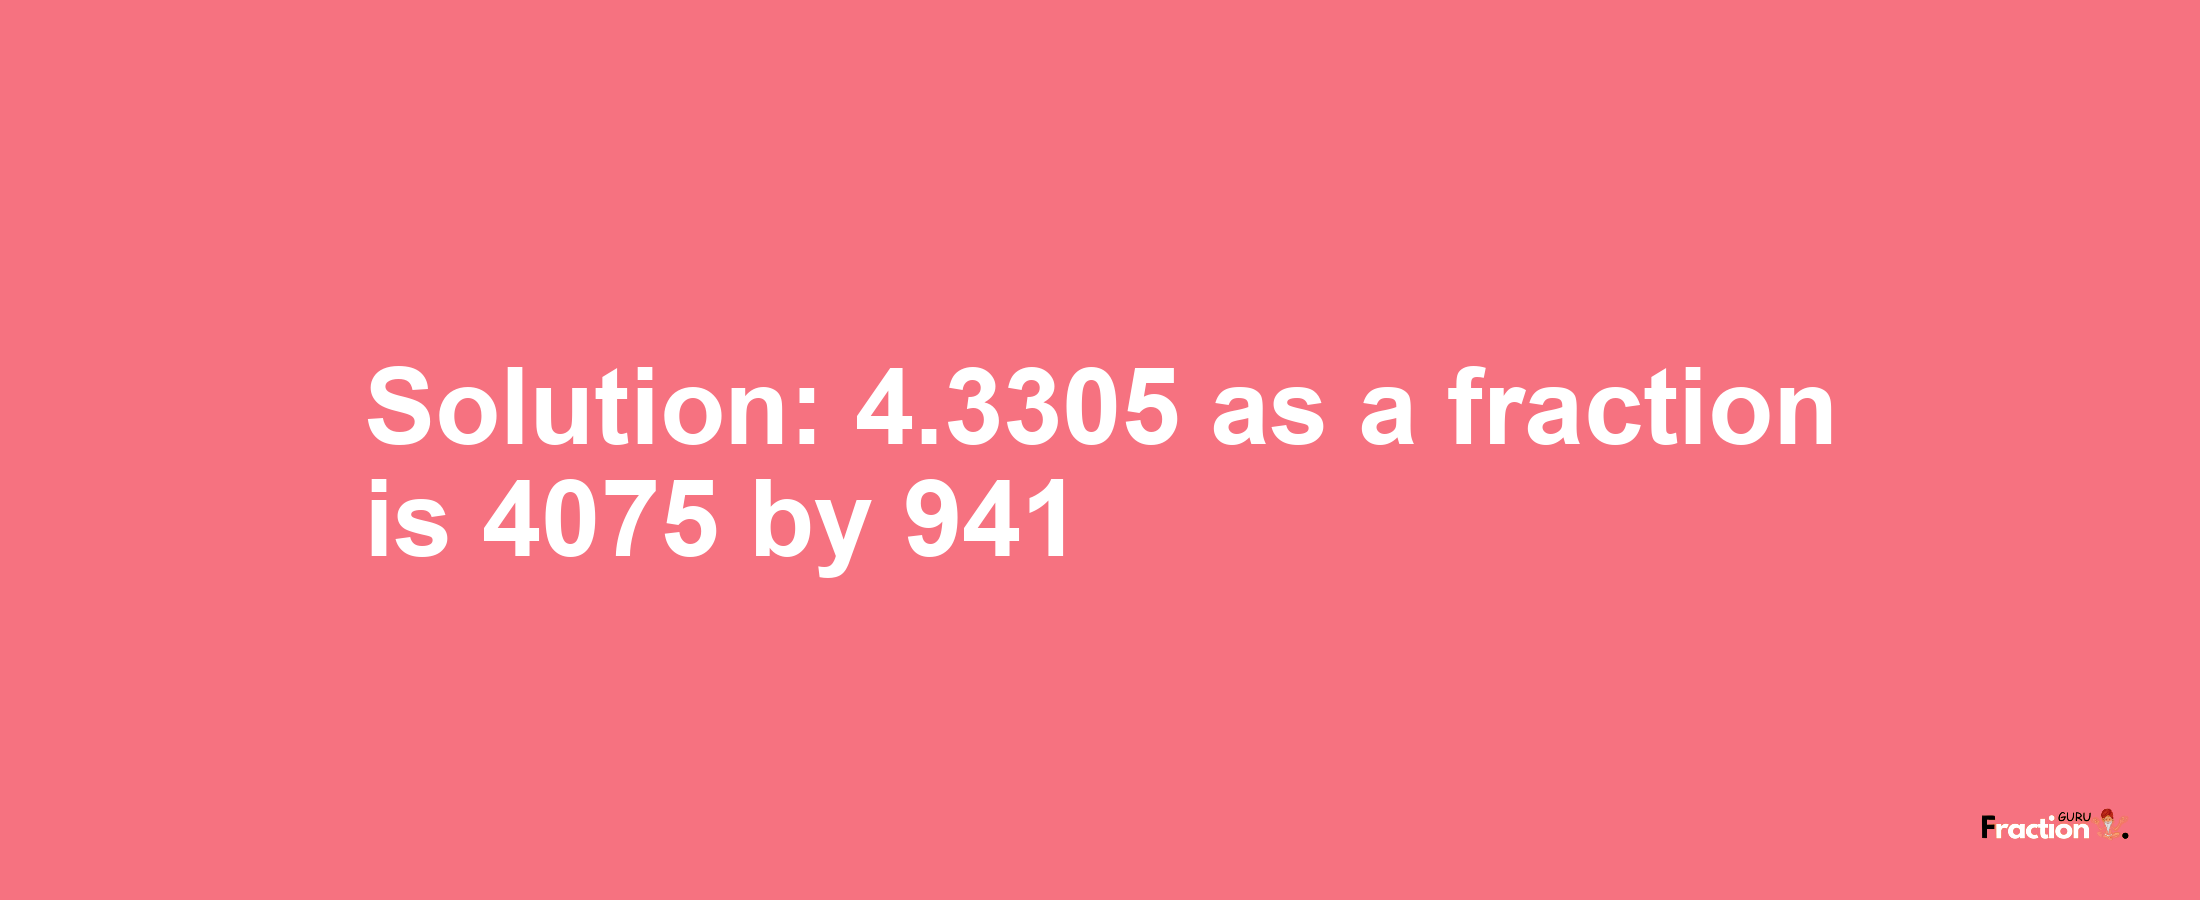 Solution:4.3305 as a fraction is 4075/941